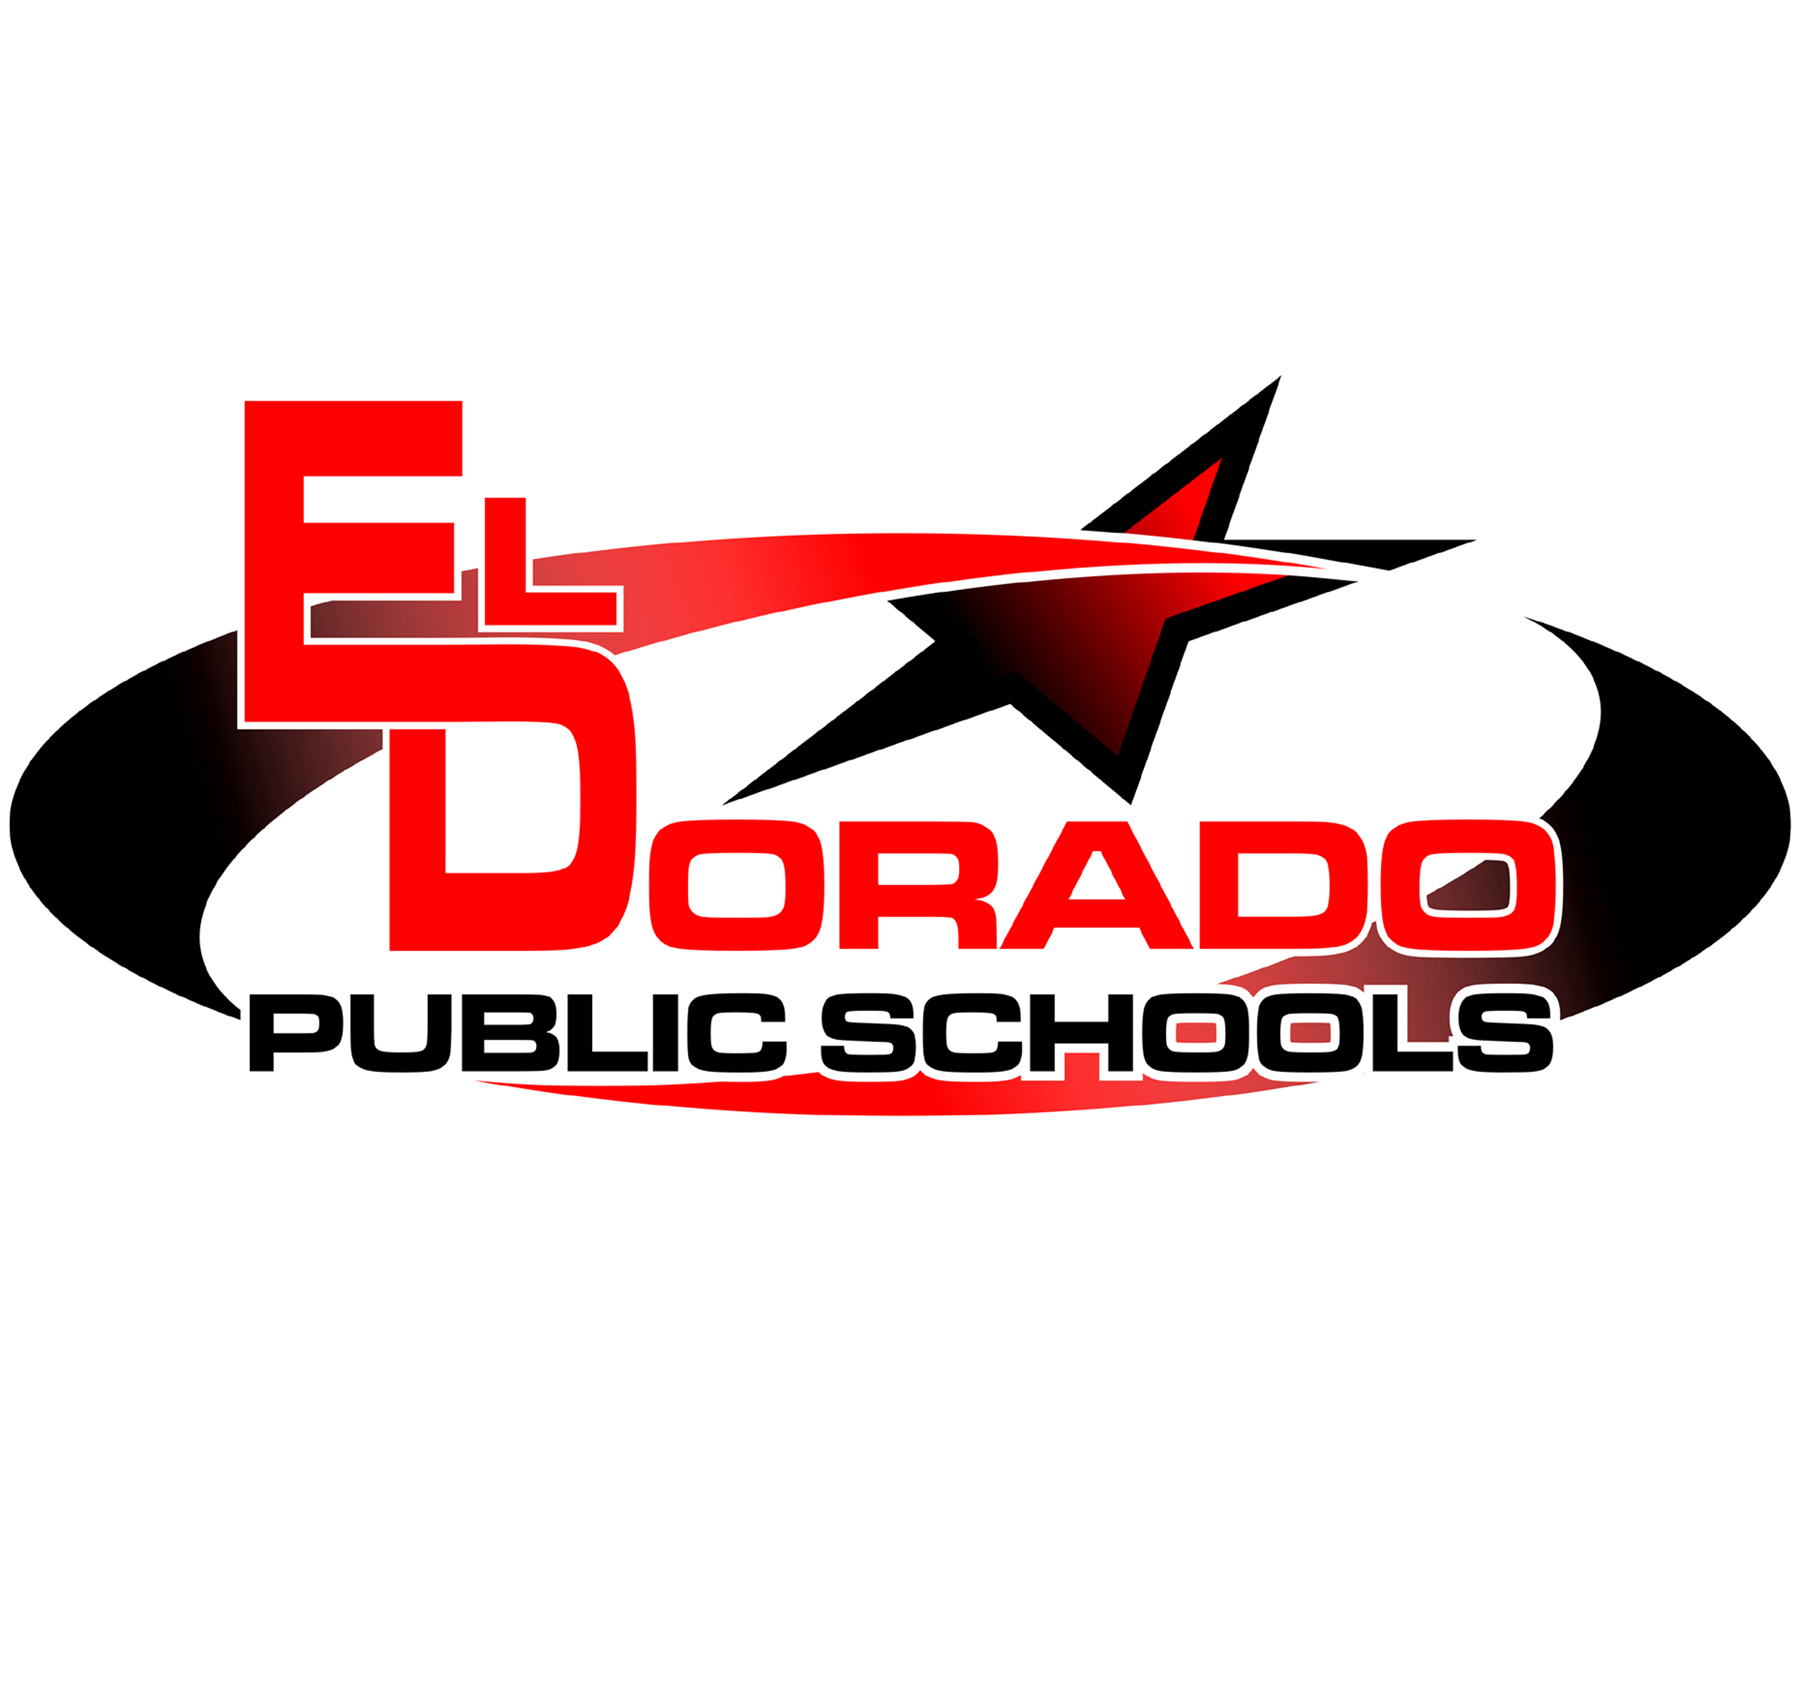 USD 490 logo Red text: El Dorado black text: Public Schools with a black oval and a red and black star on top